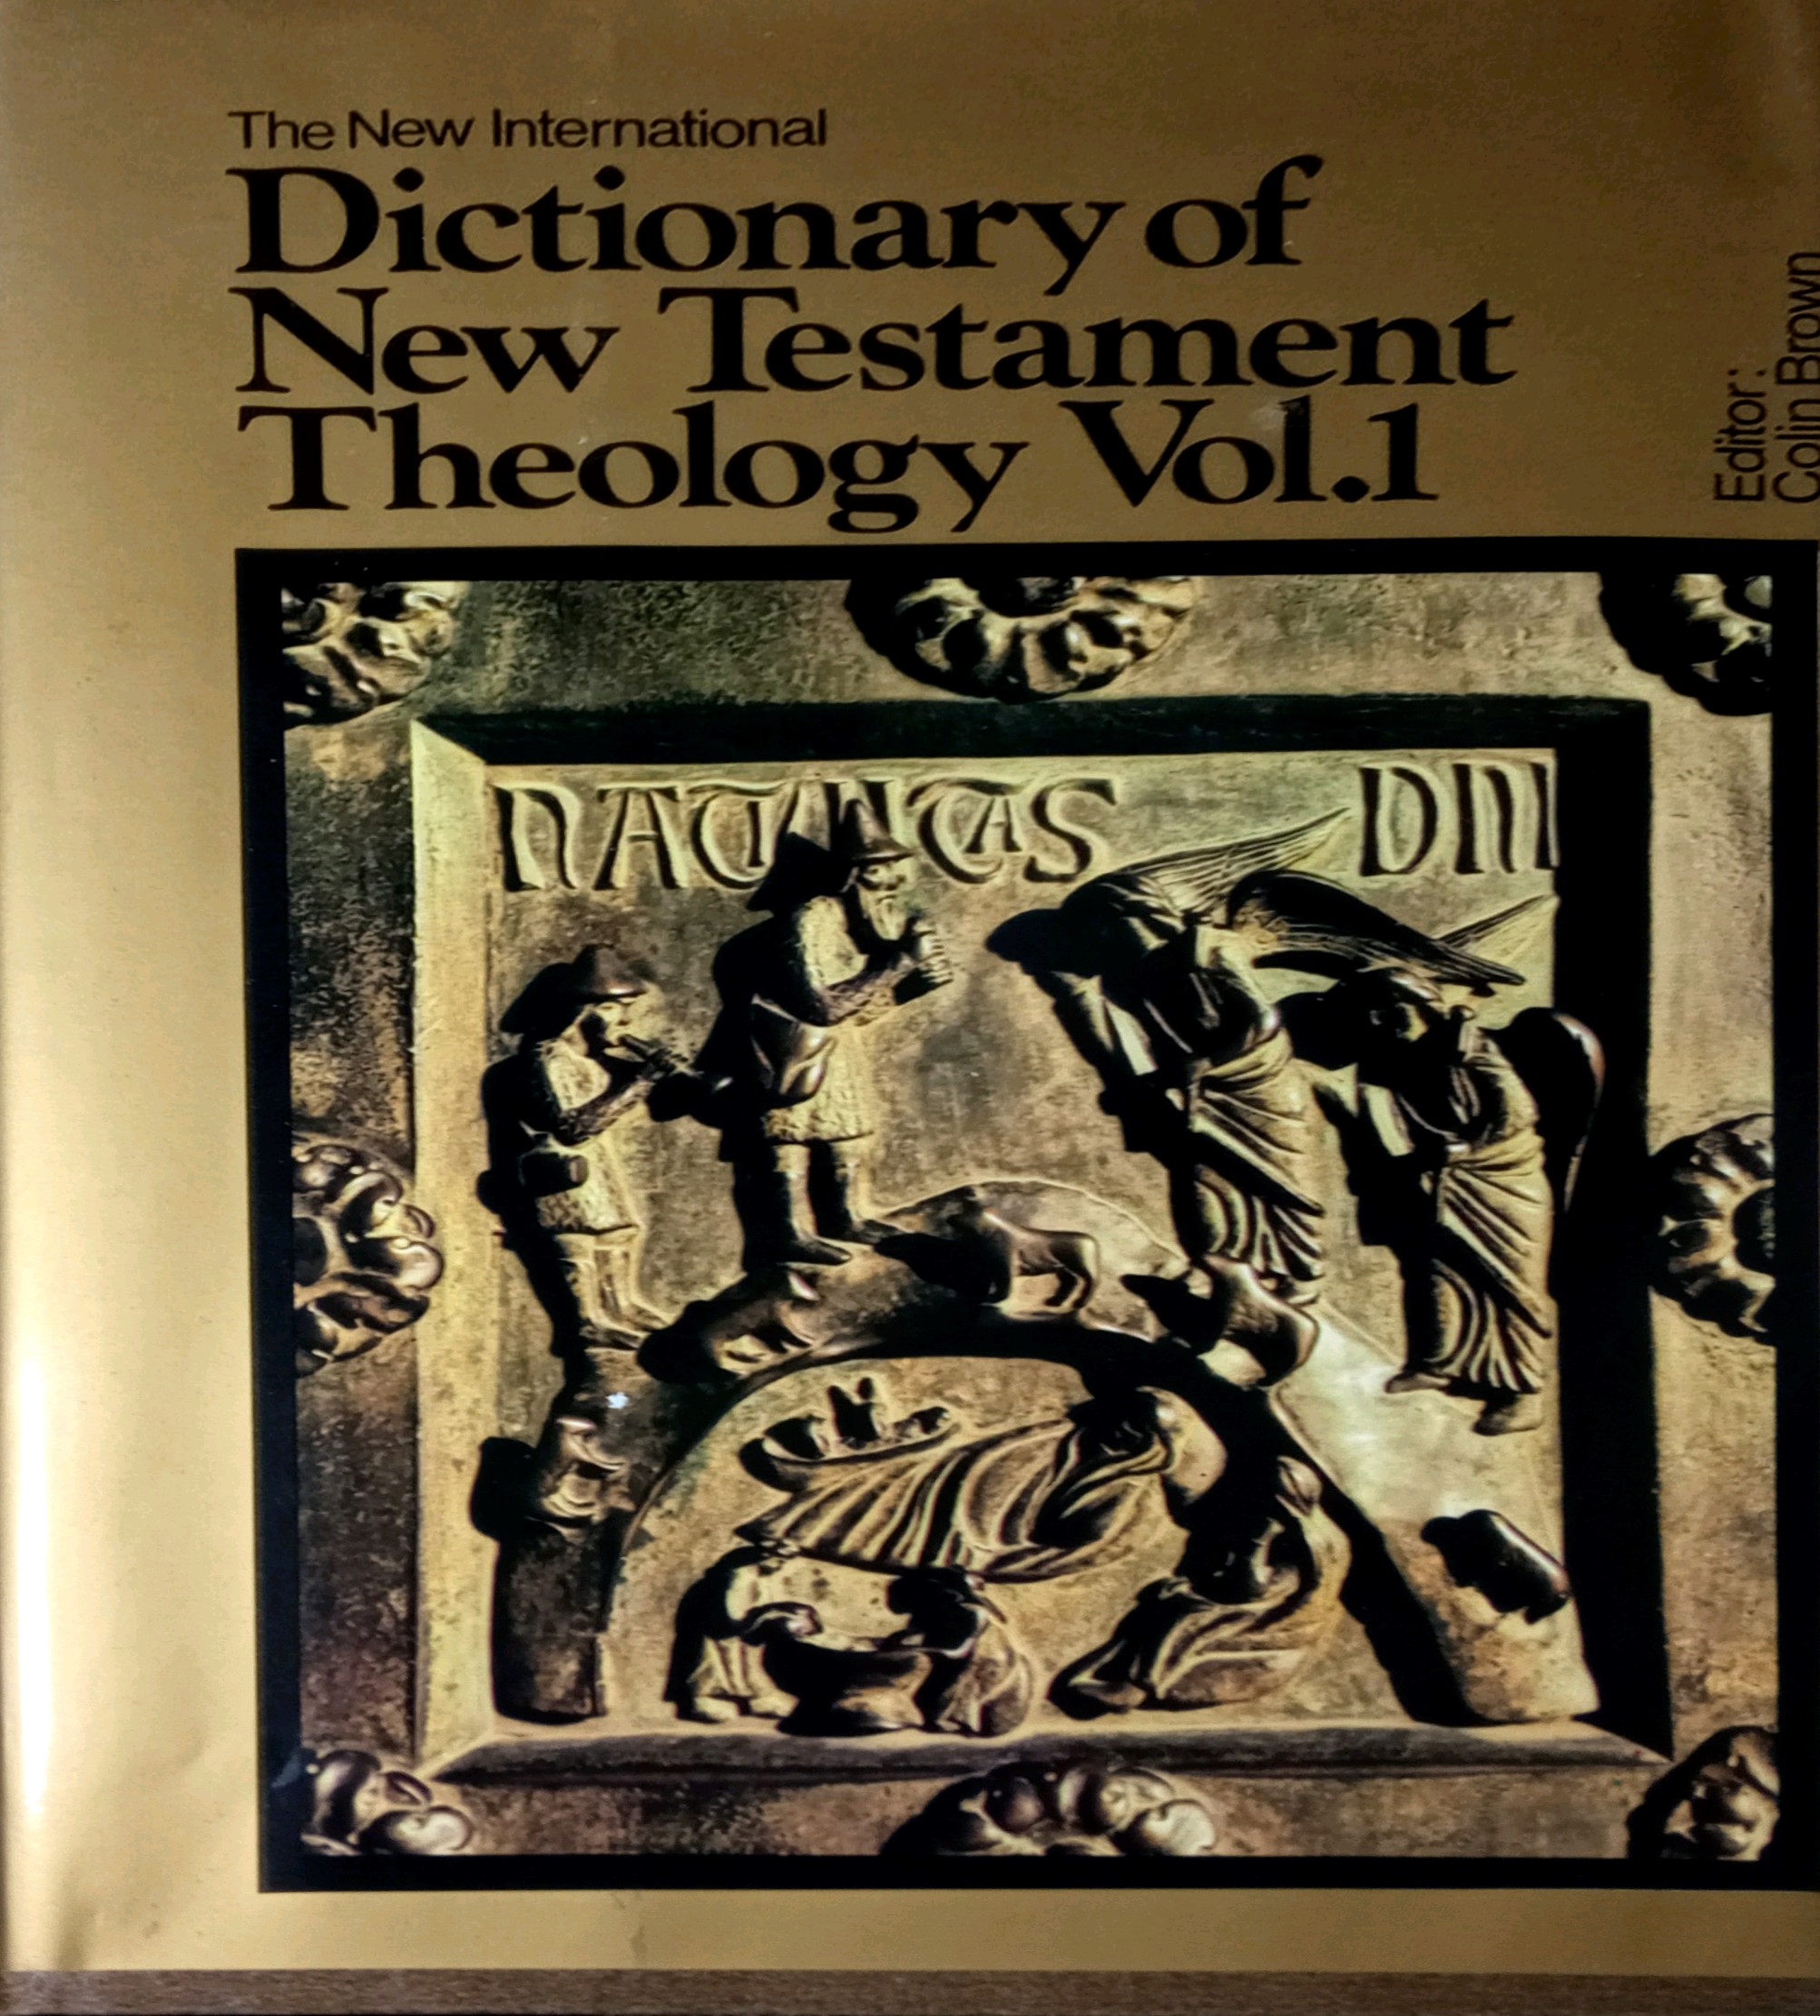 THE NEW INTERNATIONAL DICTIONARY OF NEW TESTAMENT THEOLOGY